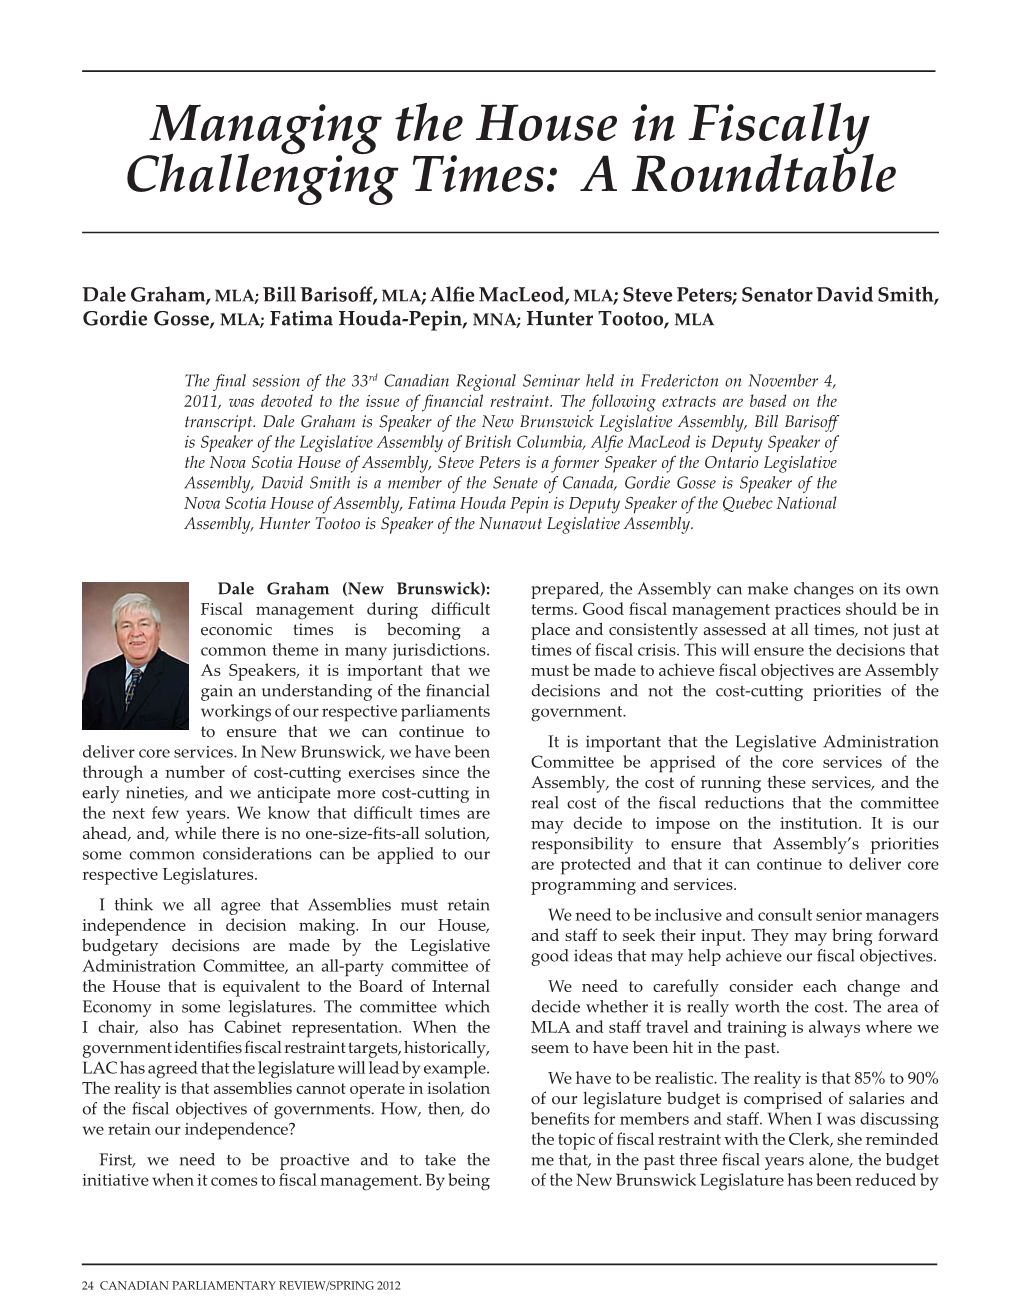 Managing the House in Fiscally Challenging Times: a Roundtable